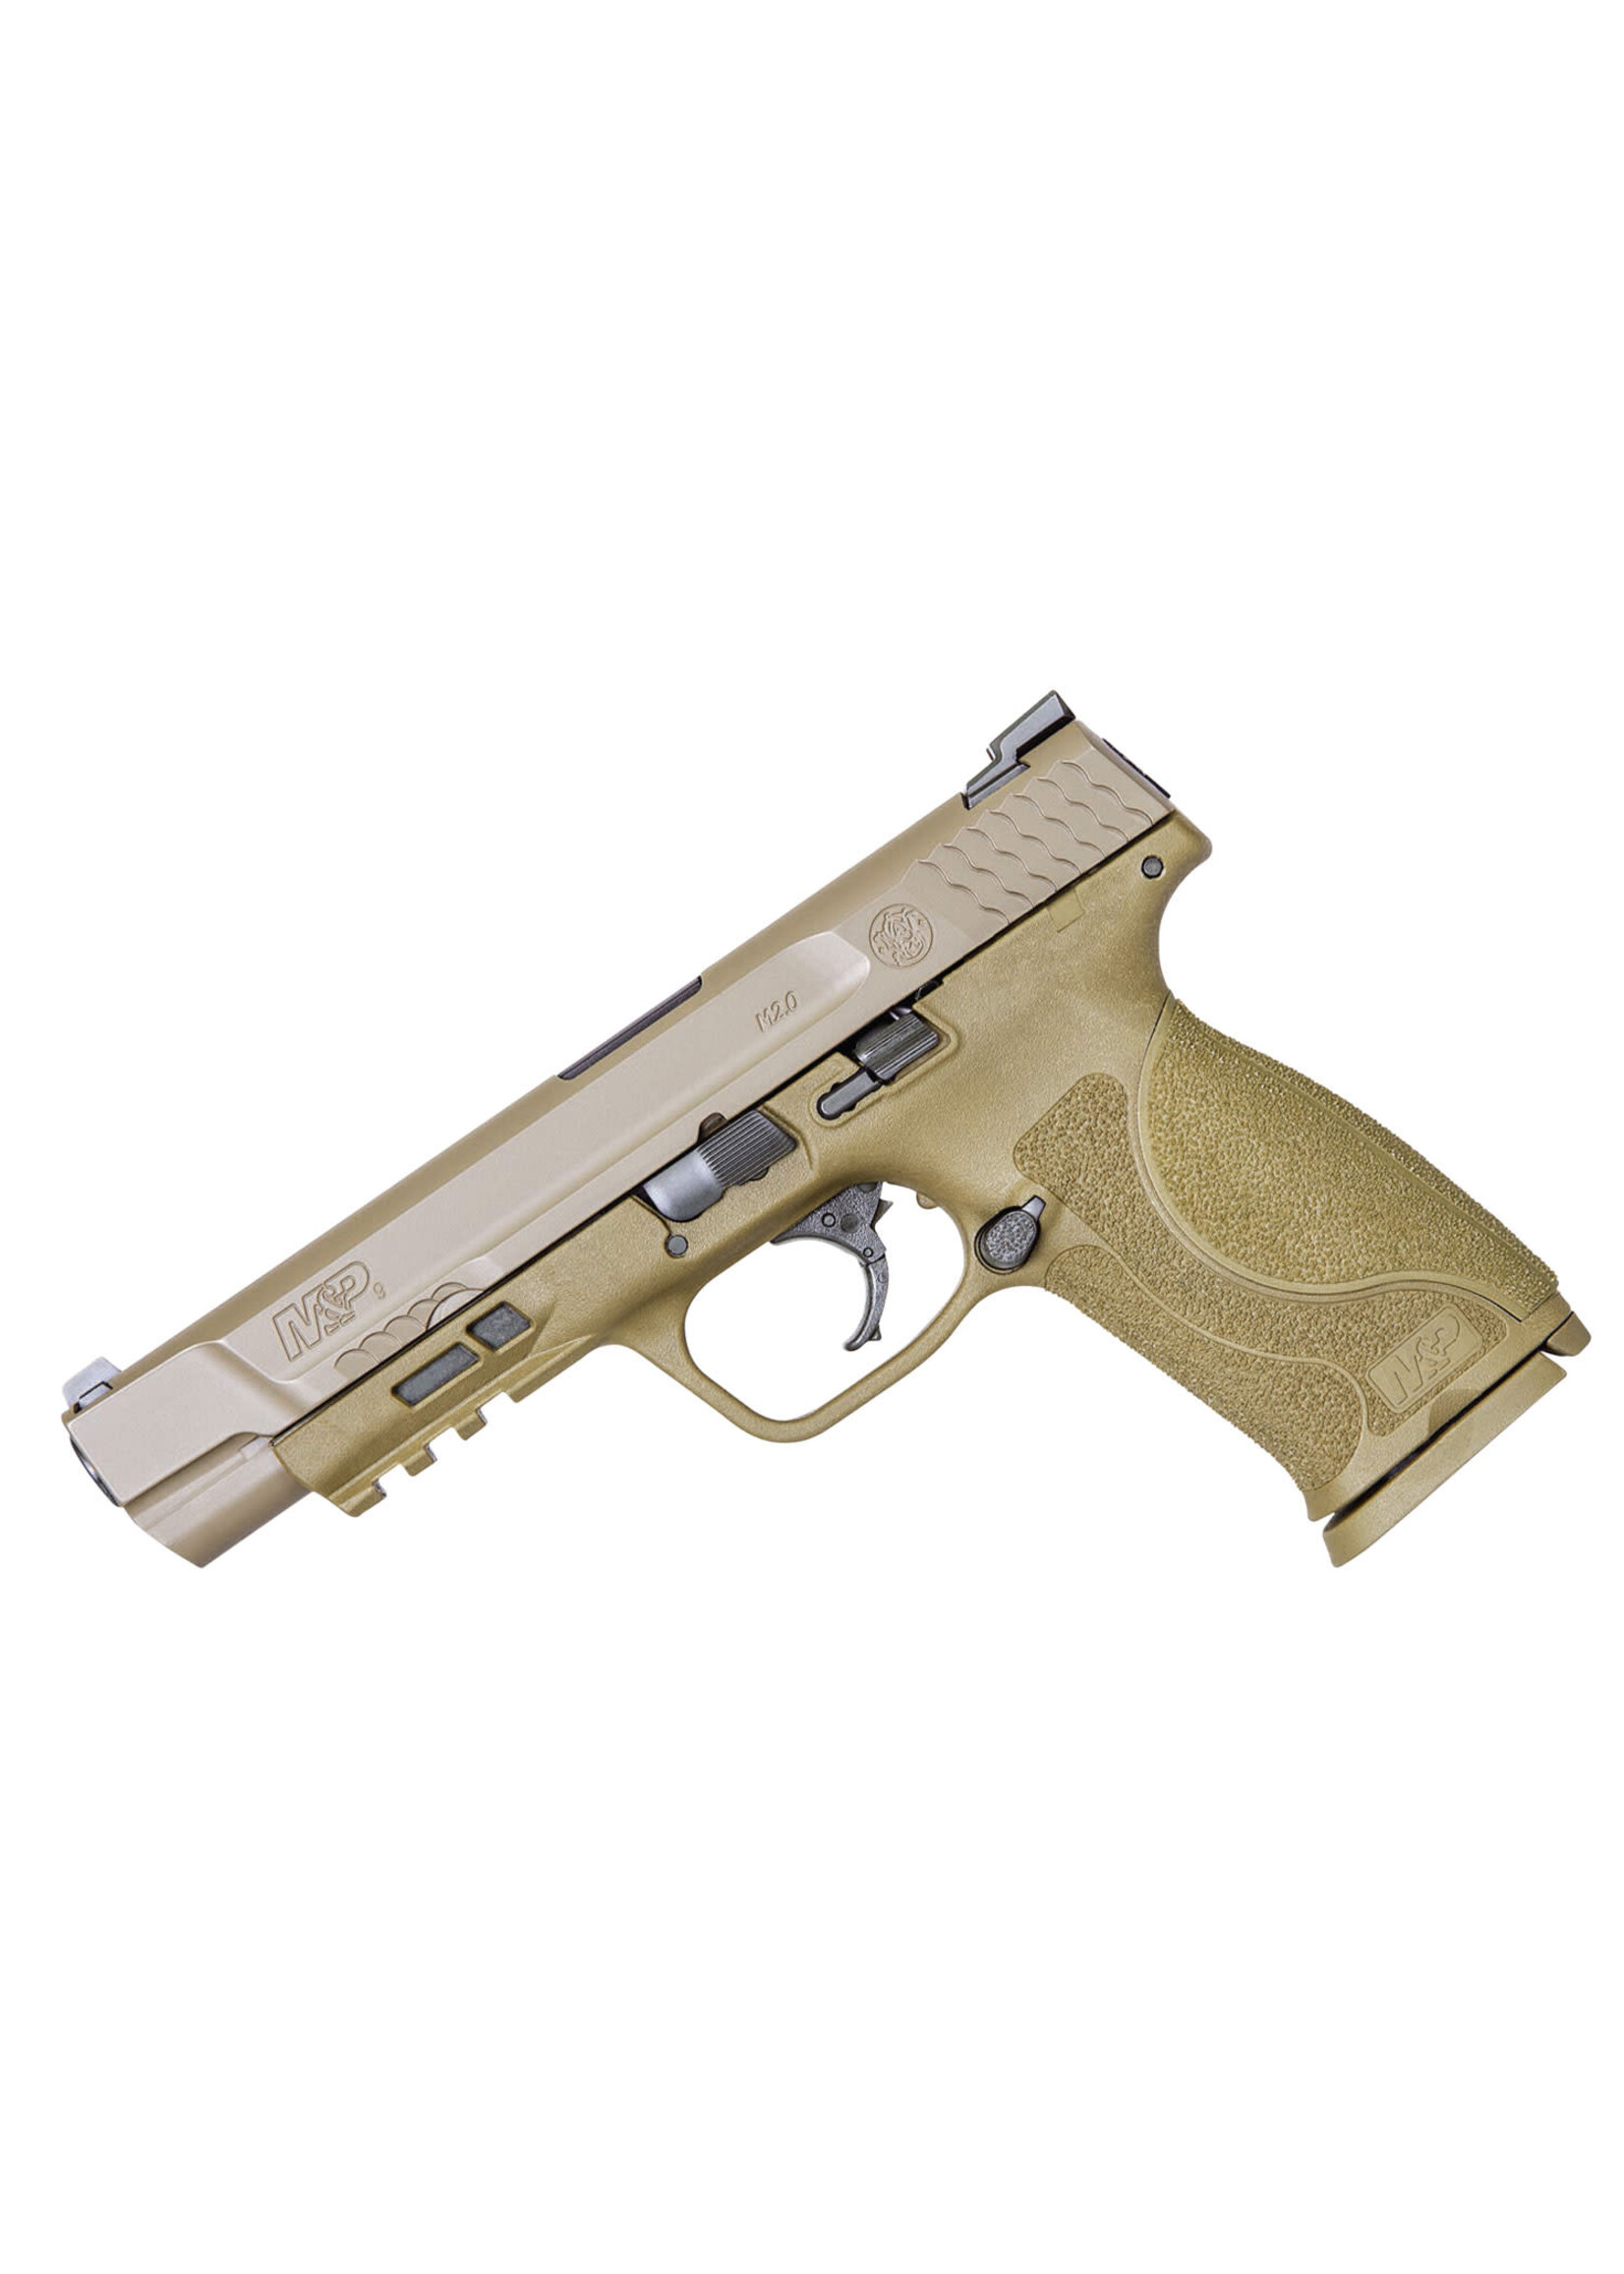 Smith and Wesson (S&W) Smith & Wesson 11989 M&P M2.0 9mm Luger 5" Barrel 17+1, Flat Dark Earth Polymer Frame With Picatinny Acc. Rail, FDE Armornite Stainless Steel Slide, No Manual Safety